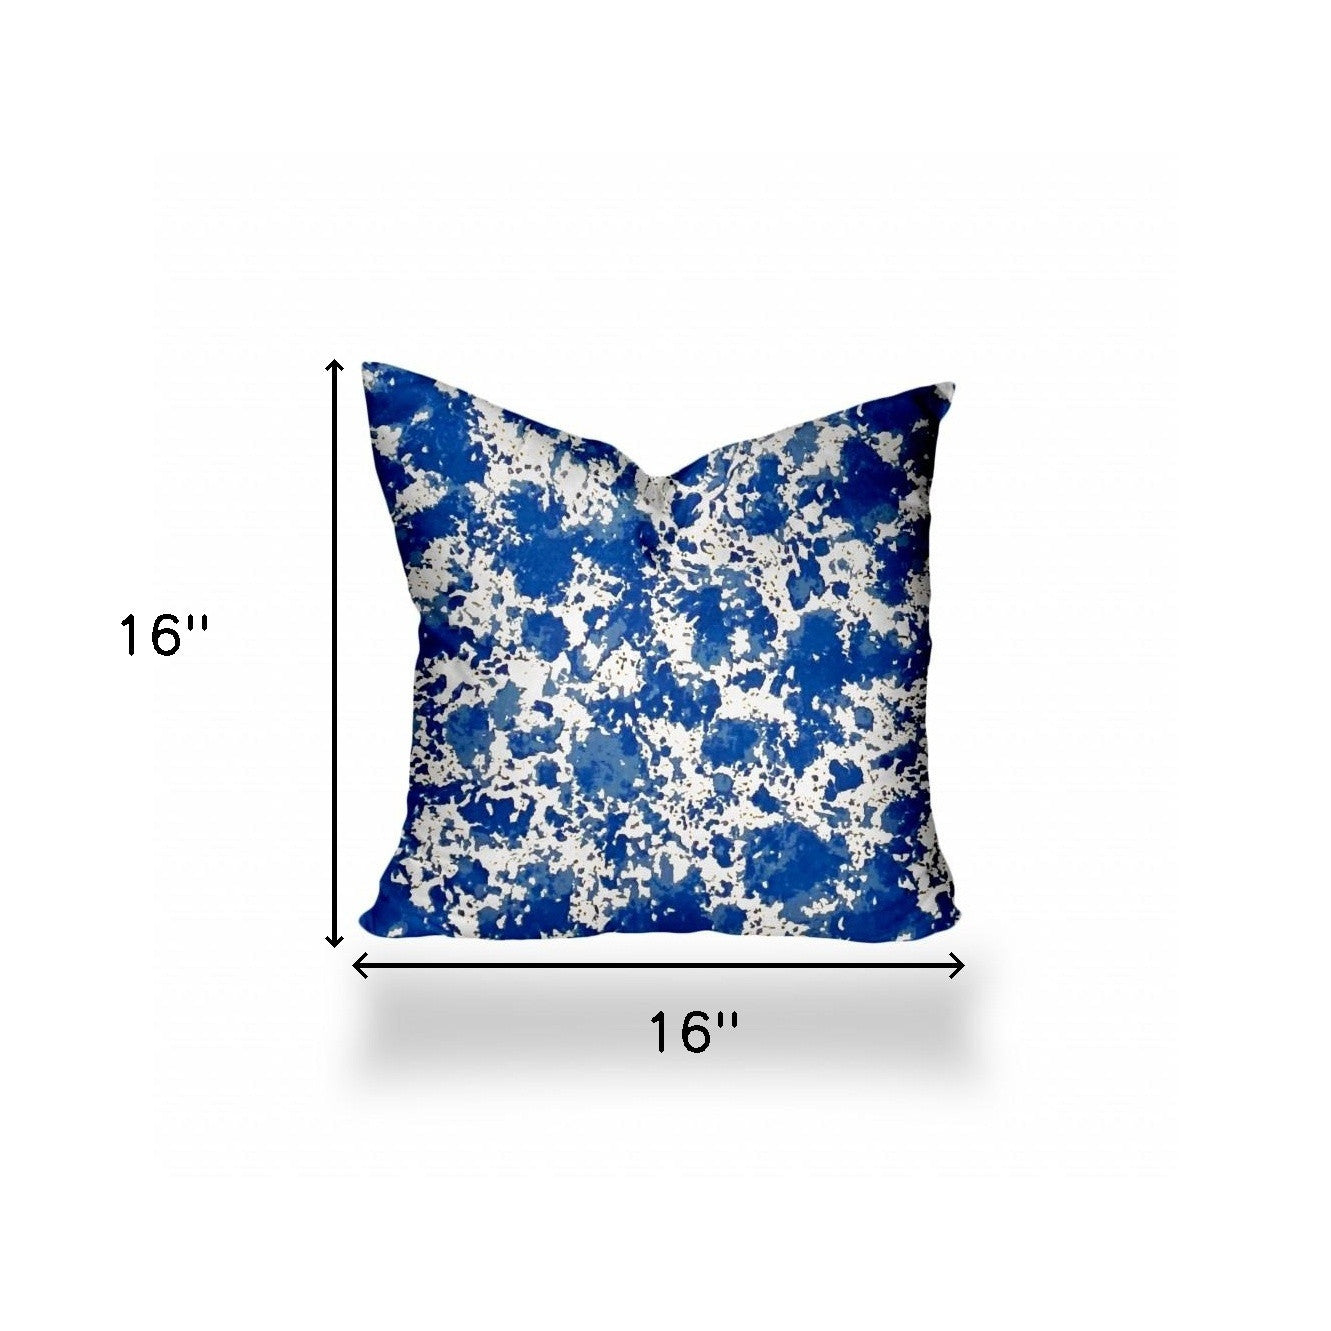 16" X 16" Blue And White Enveloped Coastal Throw Indoor Outdoor Pillow Cover